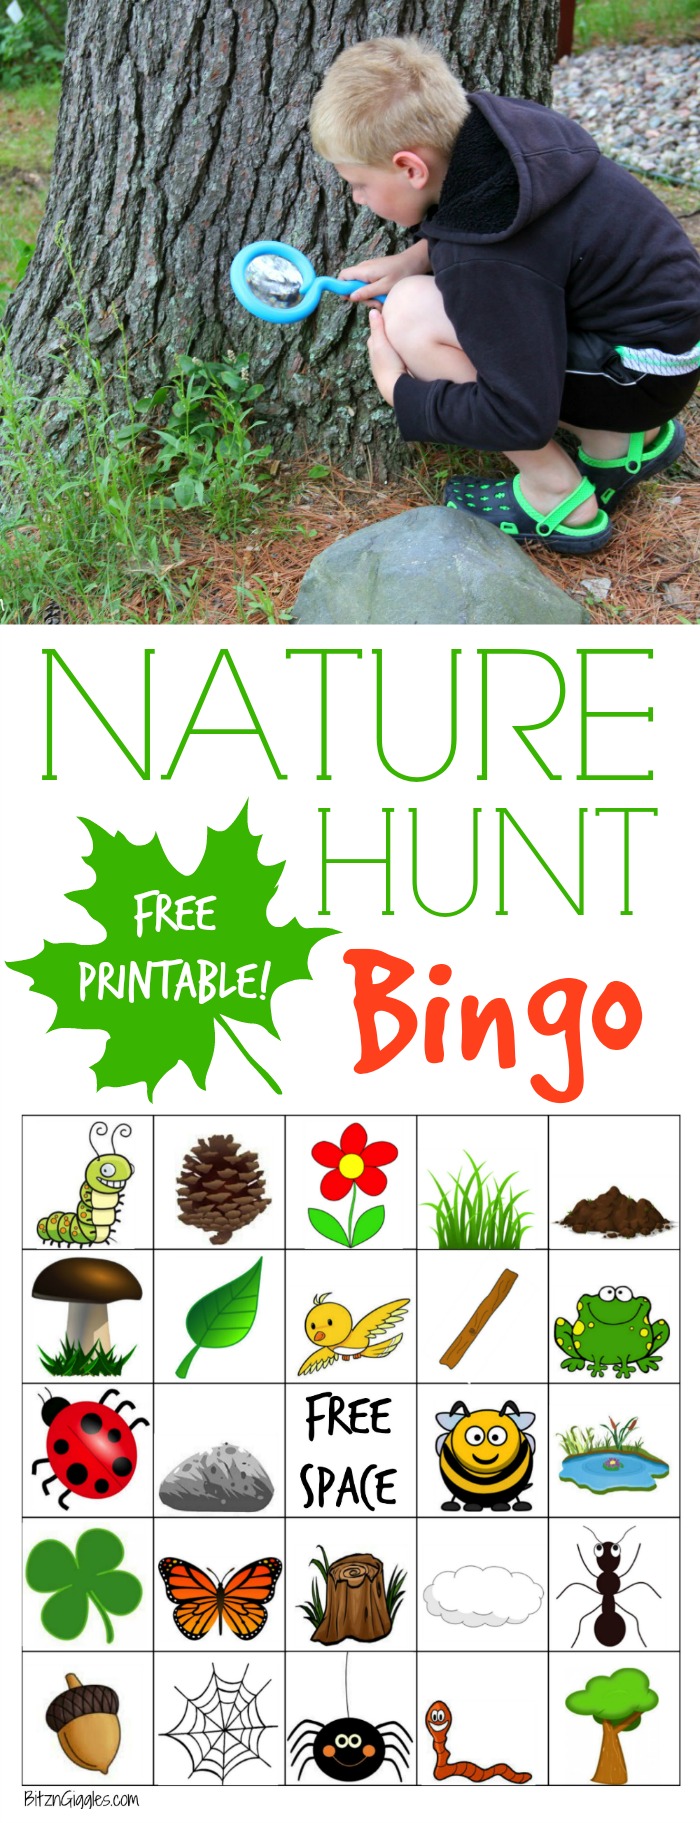 Nature Hunt Bingo - A super fun outdoor game for kids that encourages exploration of the world around them!